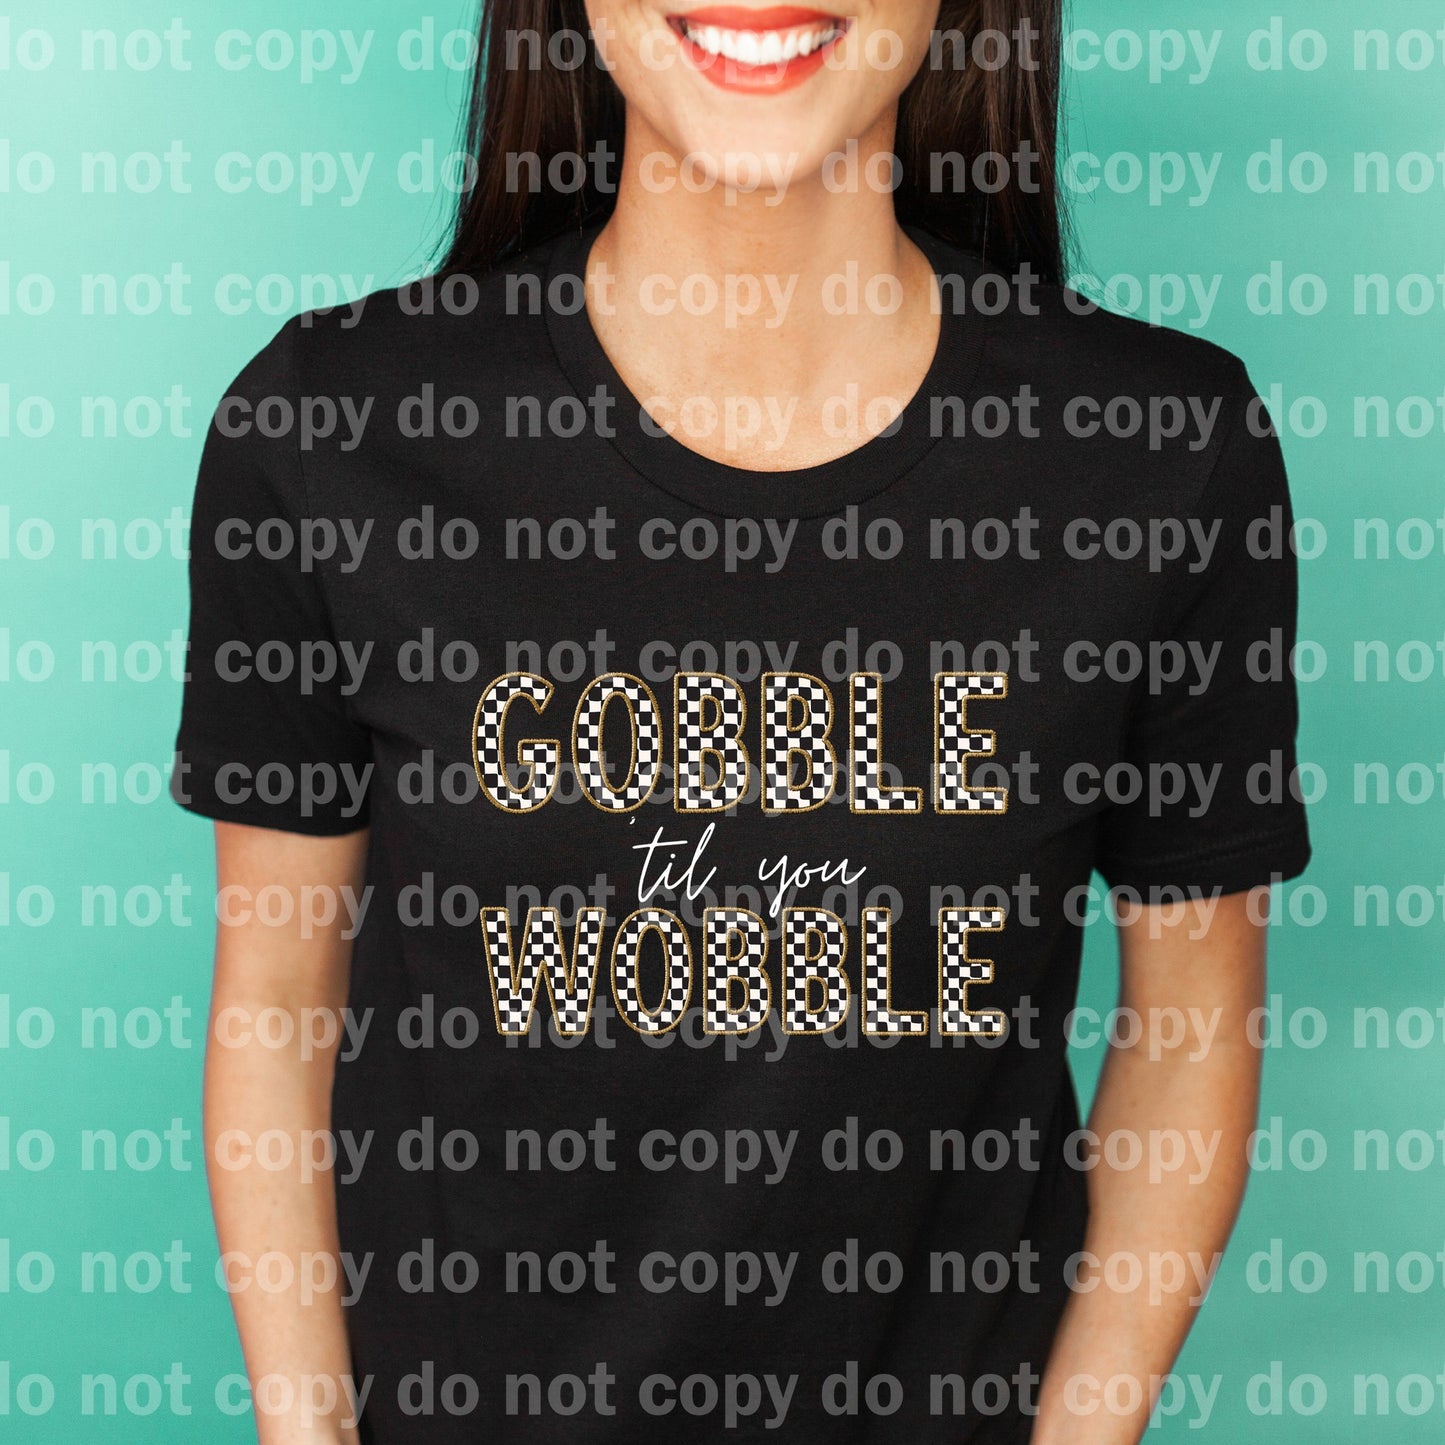 Gobble Til You Wobble Embroidery Checkered Black/White Dream Print or Sublimation Print